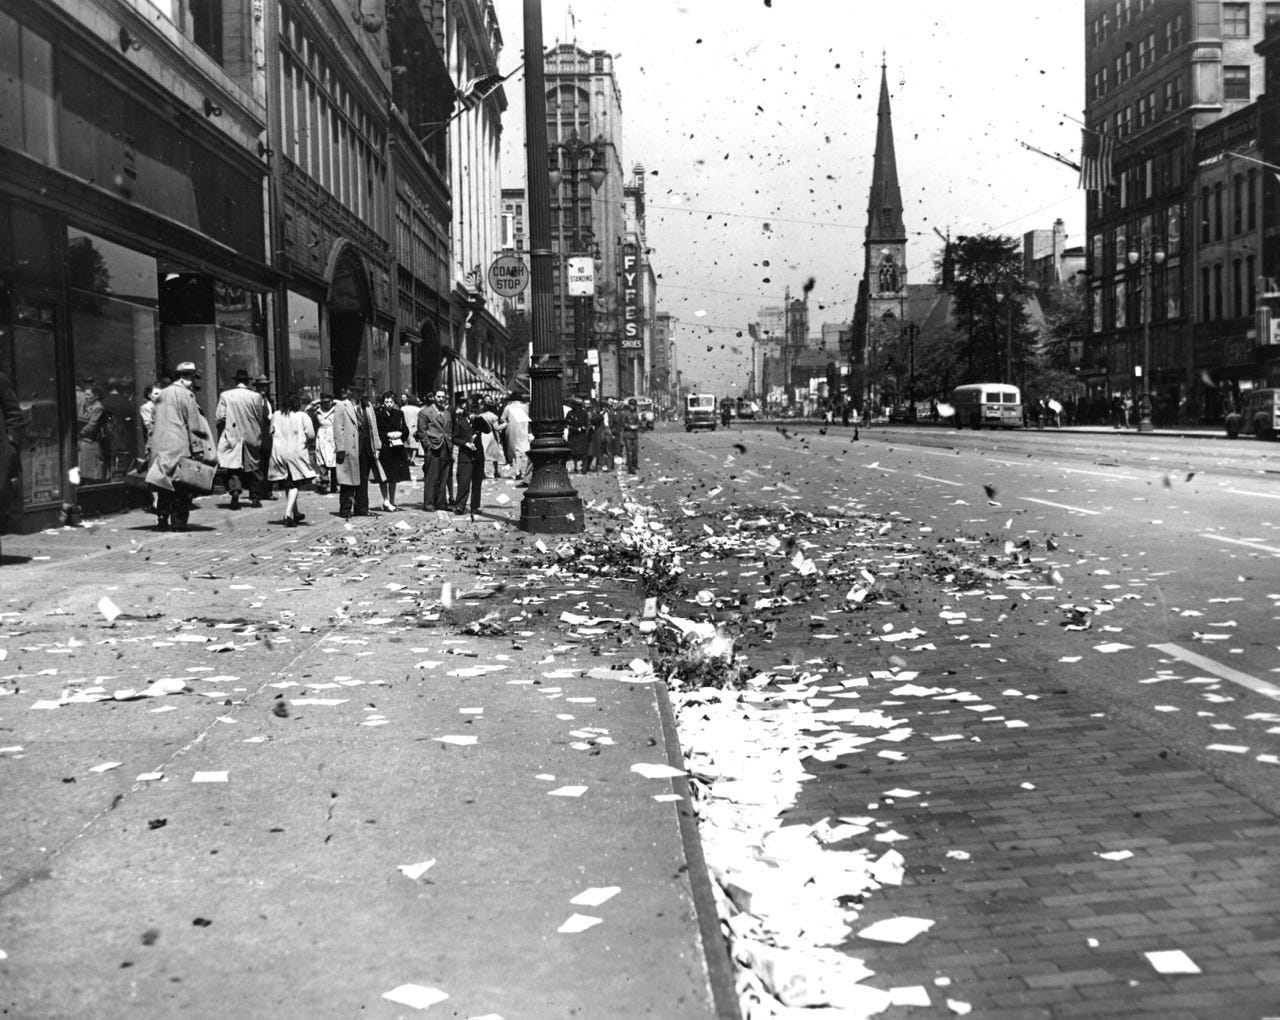 Paper burns on Woodward in front of Grinnell's Music store at Grand River after the celebrations for VE Day on May 8, 1945.